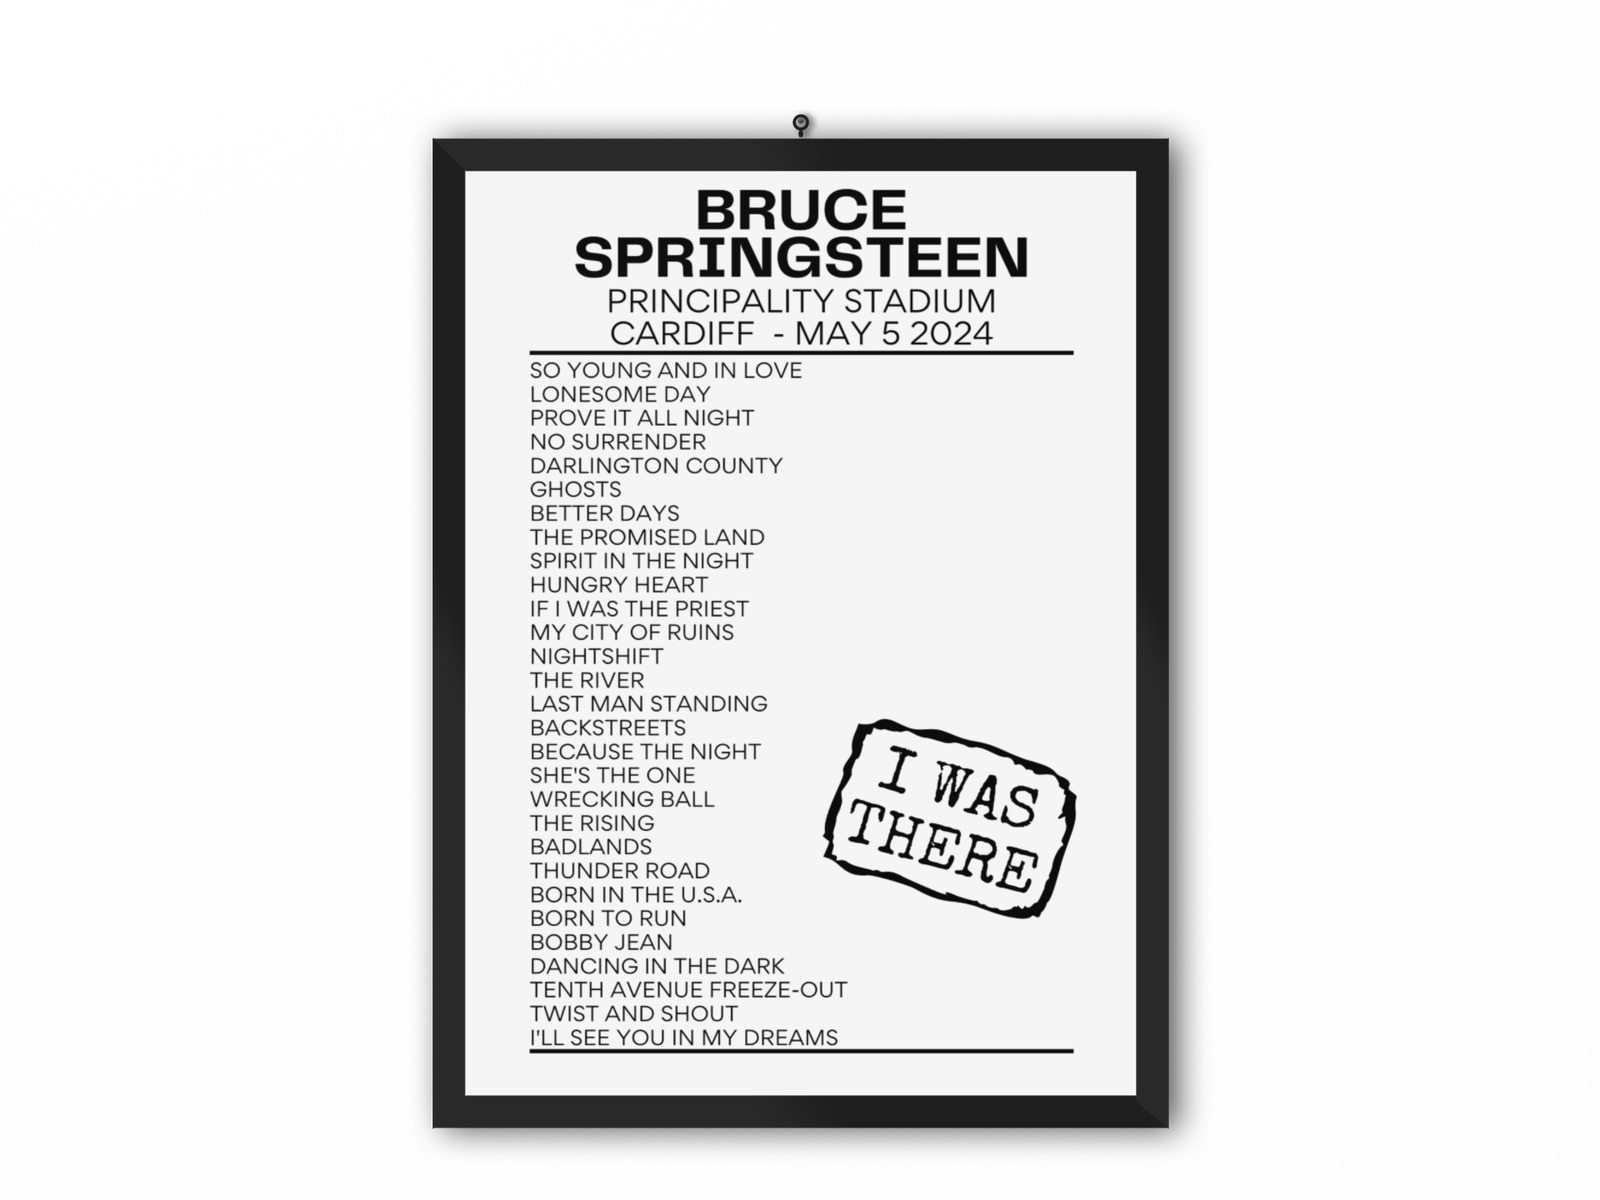 Bruce Springsteen Cardiff May 5 2024 Replica Setlist - I Was There